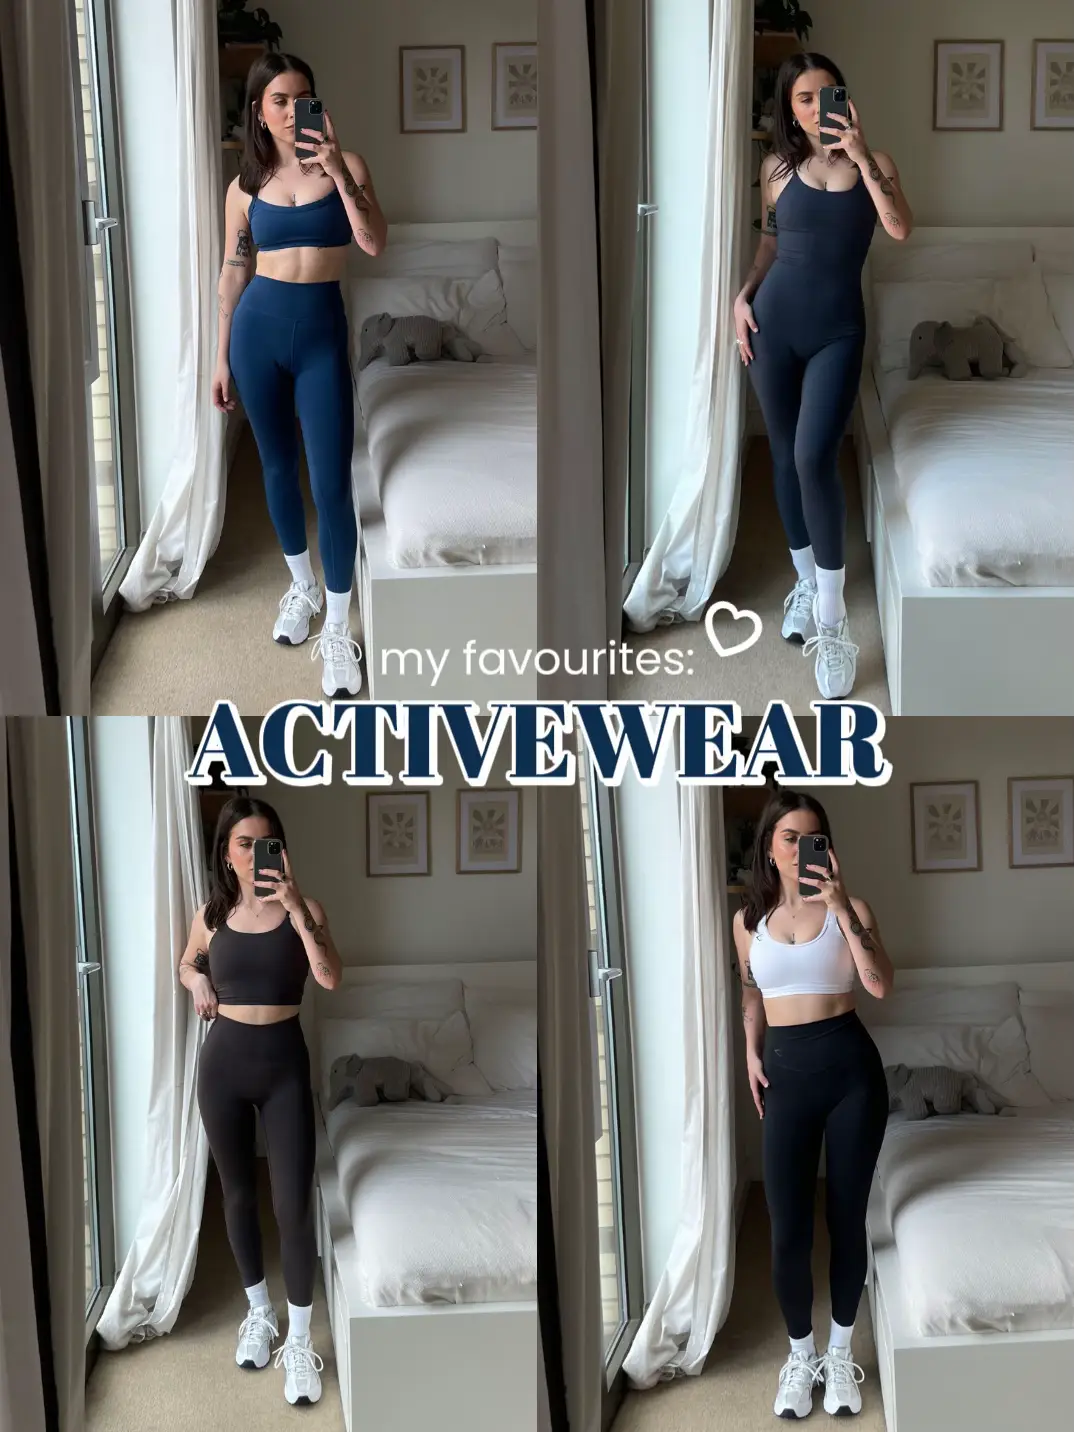 Favourite Activewear🏋🏻‍♀️, Gallery posted by Marta